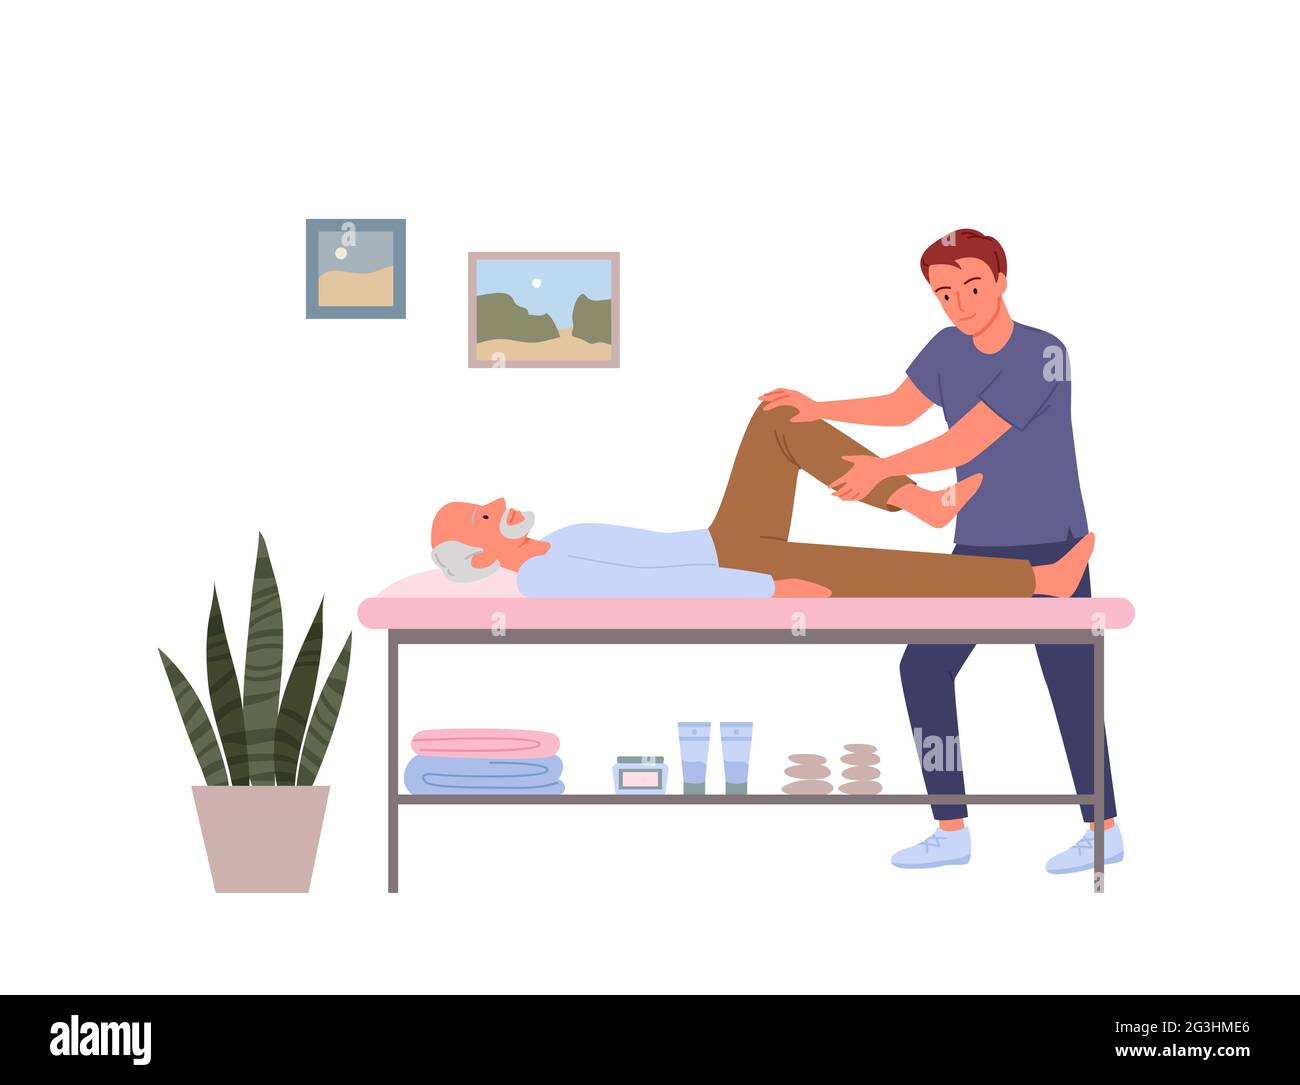 Rehabilitation for elderly people, doctor doing massage, recovery exercise with old man Stock Vector